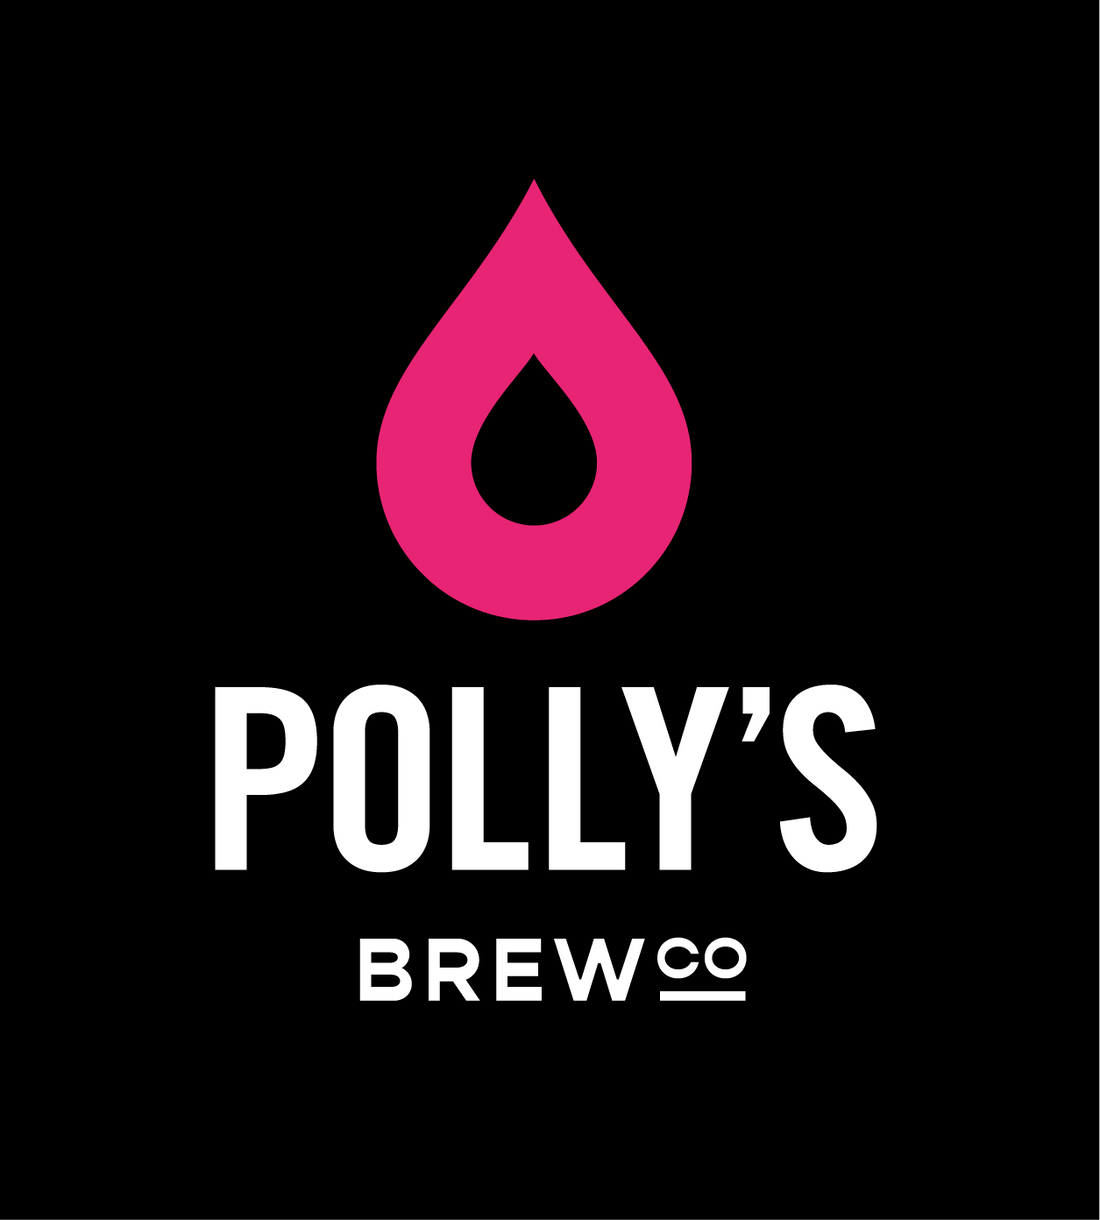 Polly's Brew Co. / ポリーズ